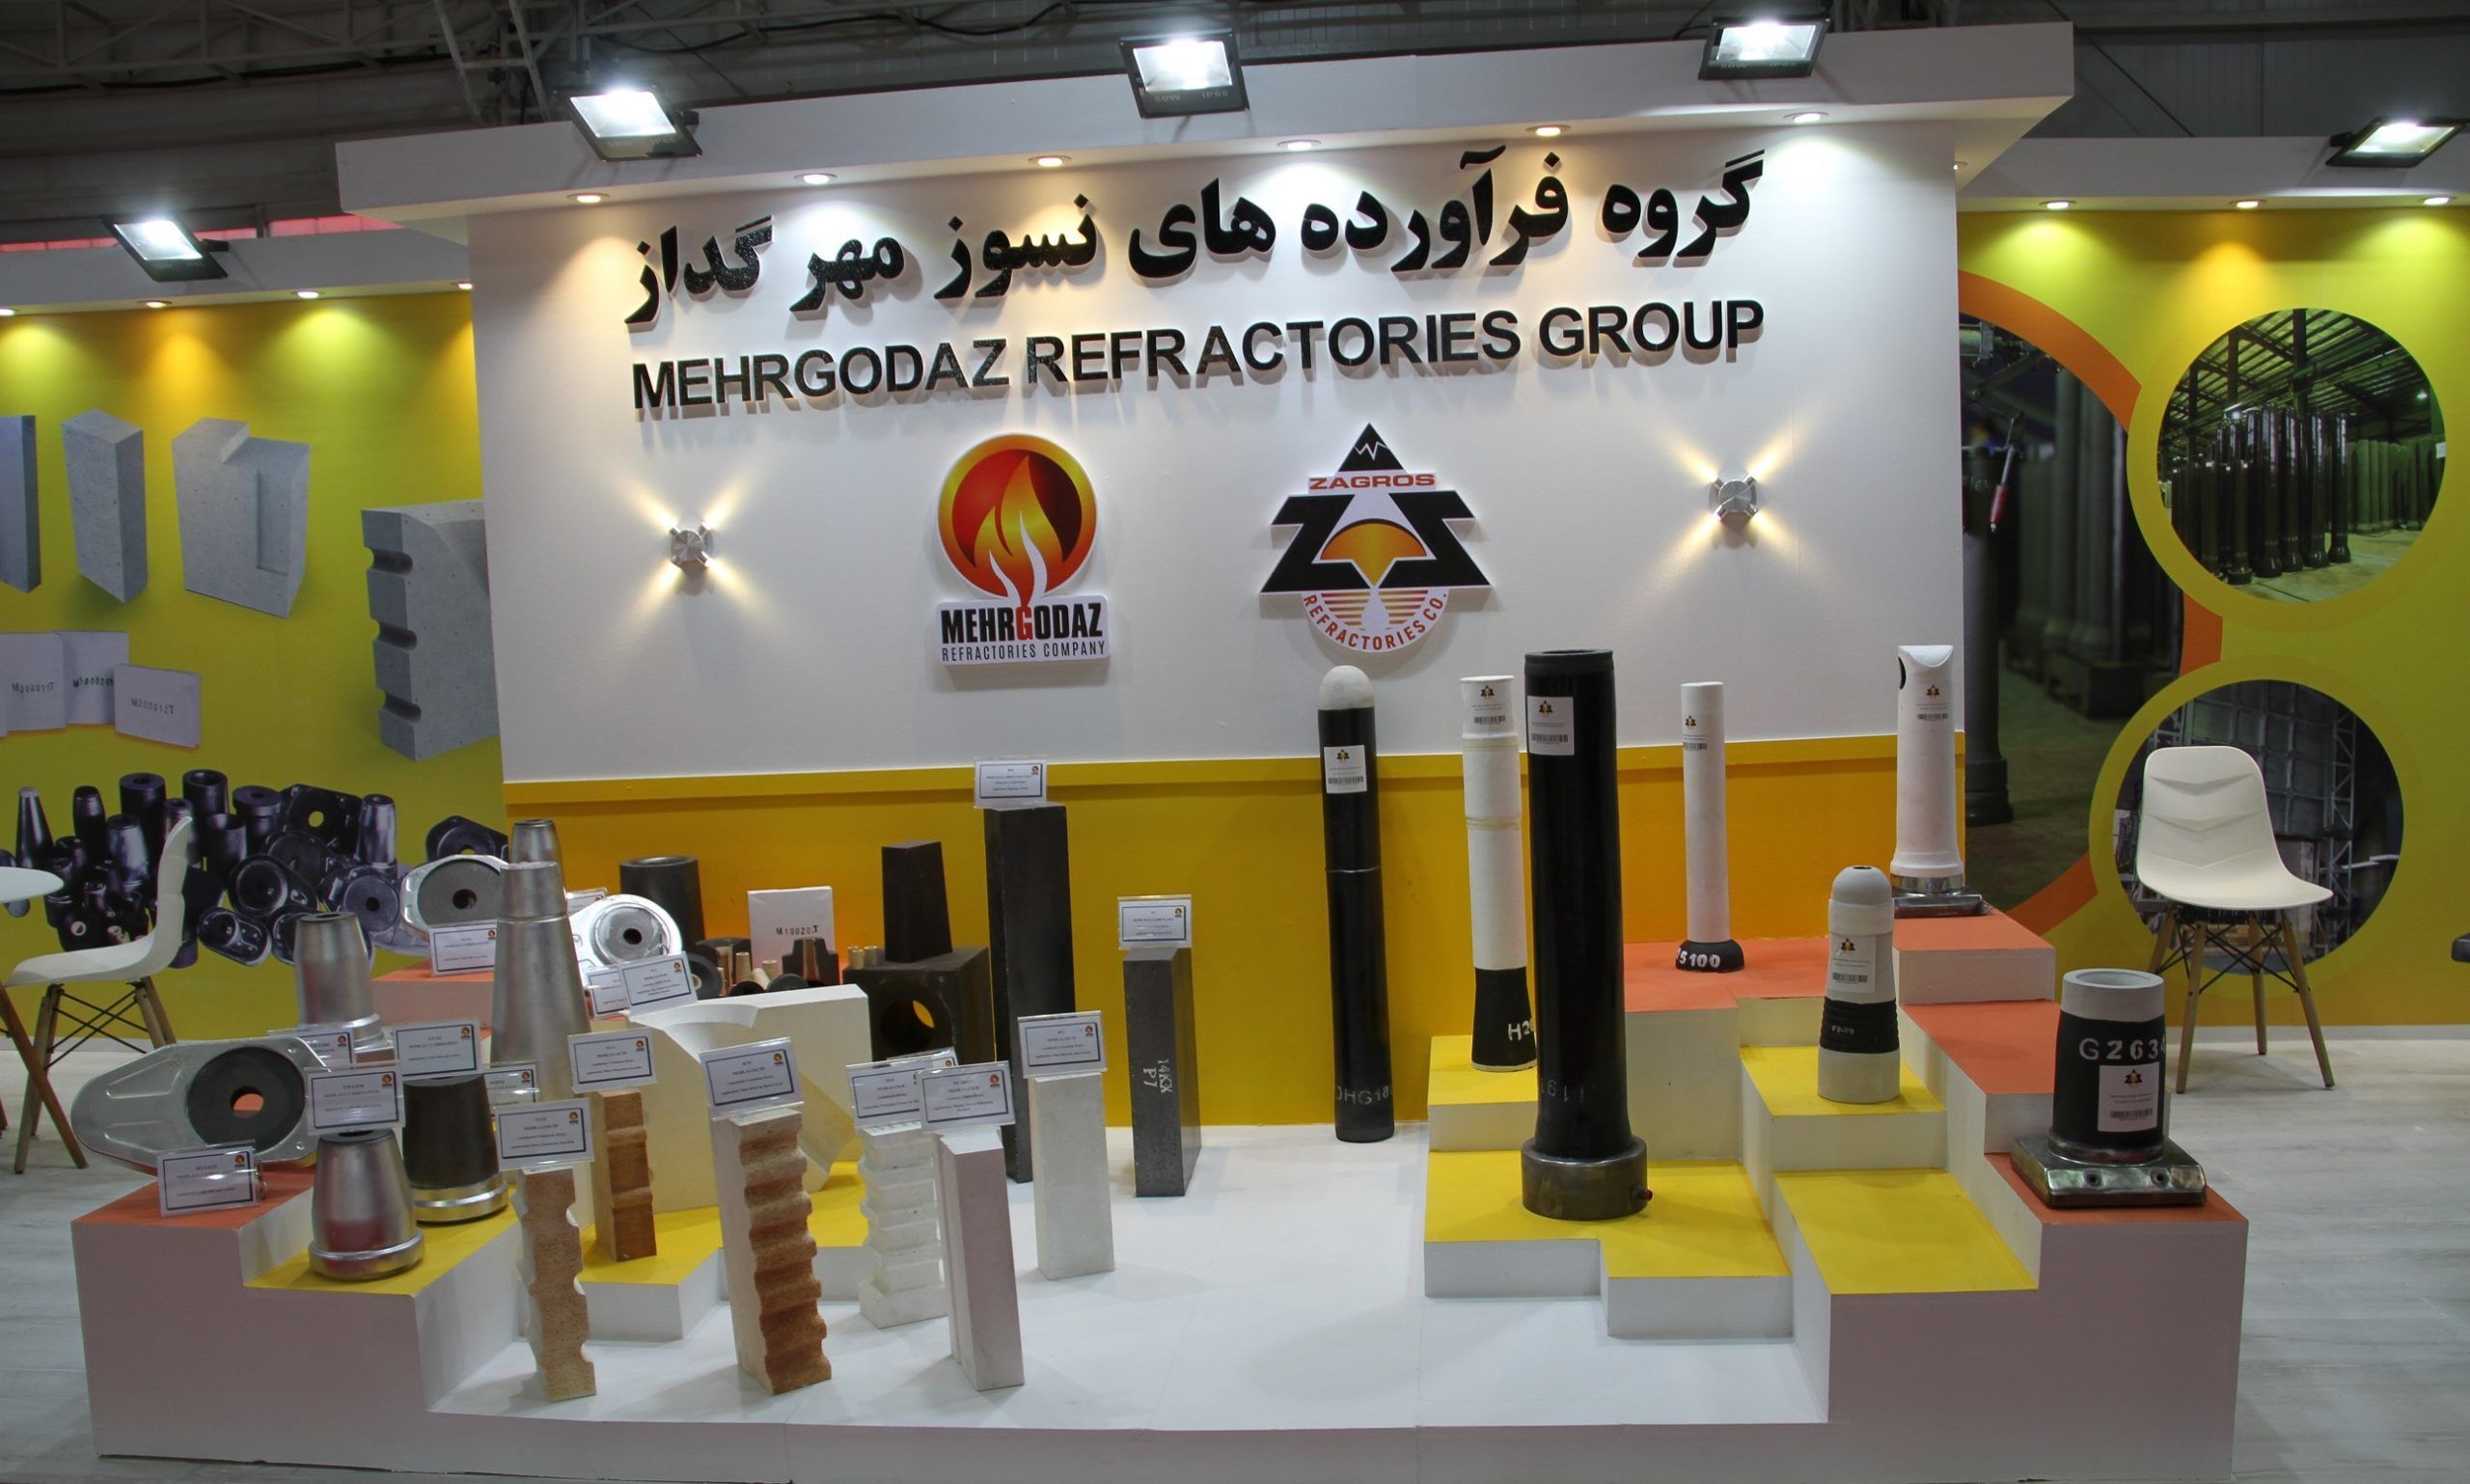 IMG 1285 2 scaled - The participation of Mehrgodaz refractories company in the sixth refractory exhibition